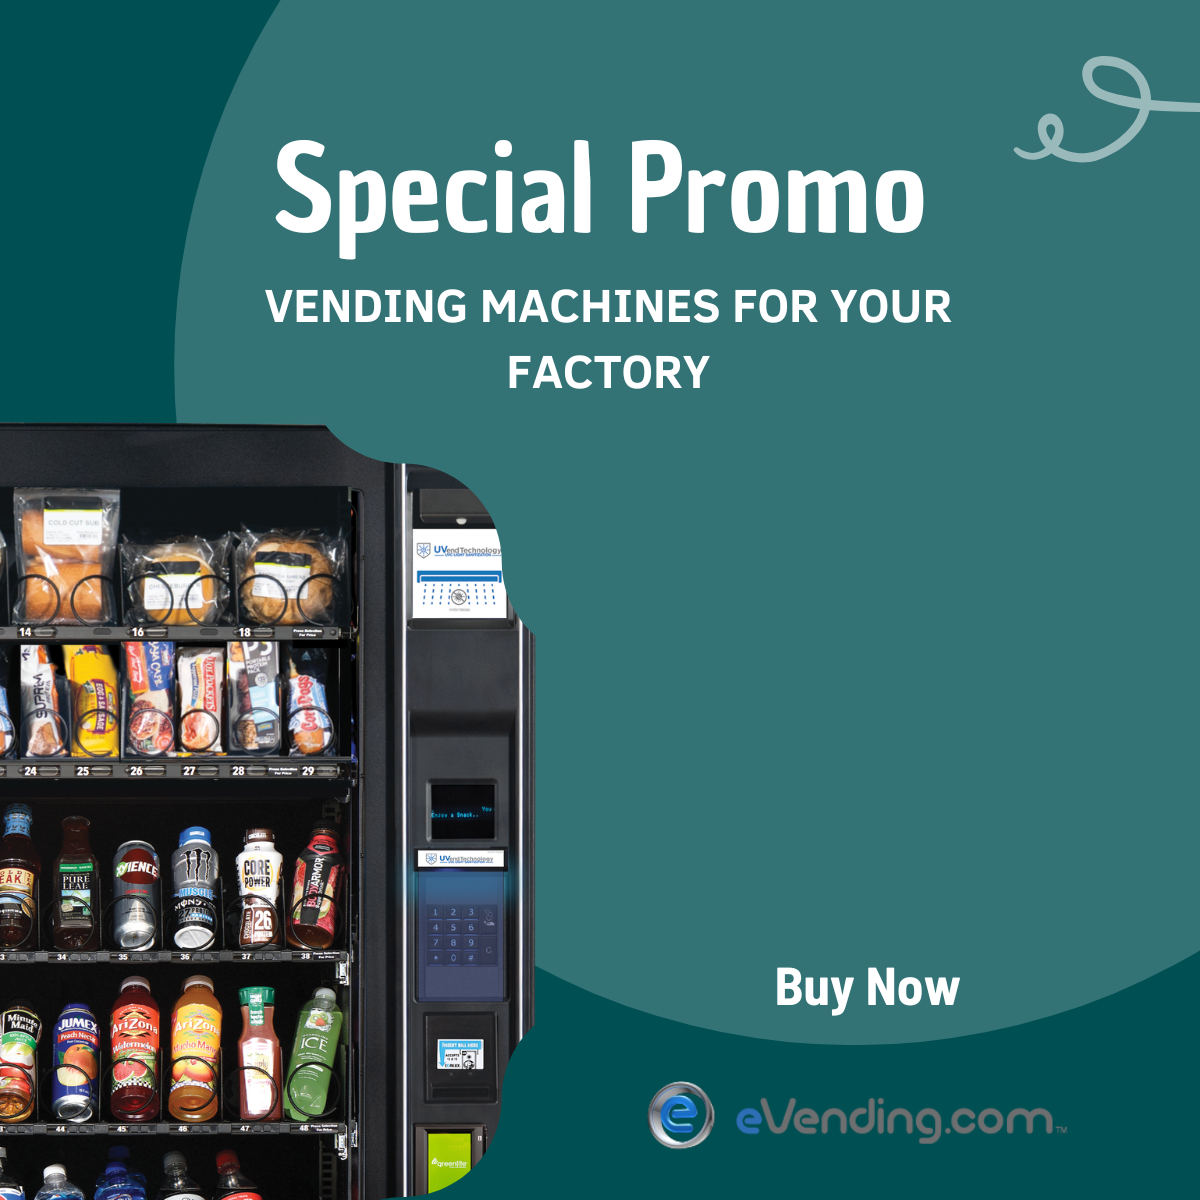 WHERE ARE YOU GOING TO BUY VENDING MACHINES FOR YOUR FACTORY?